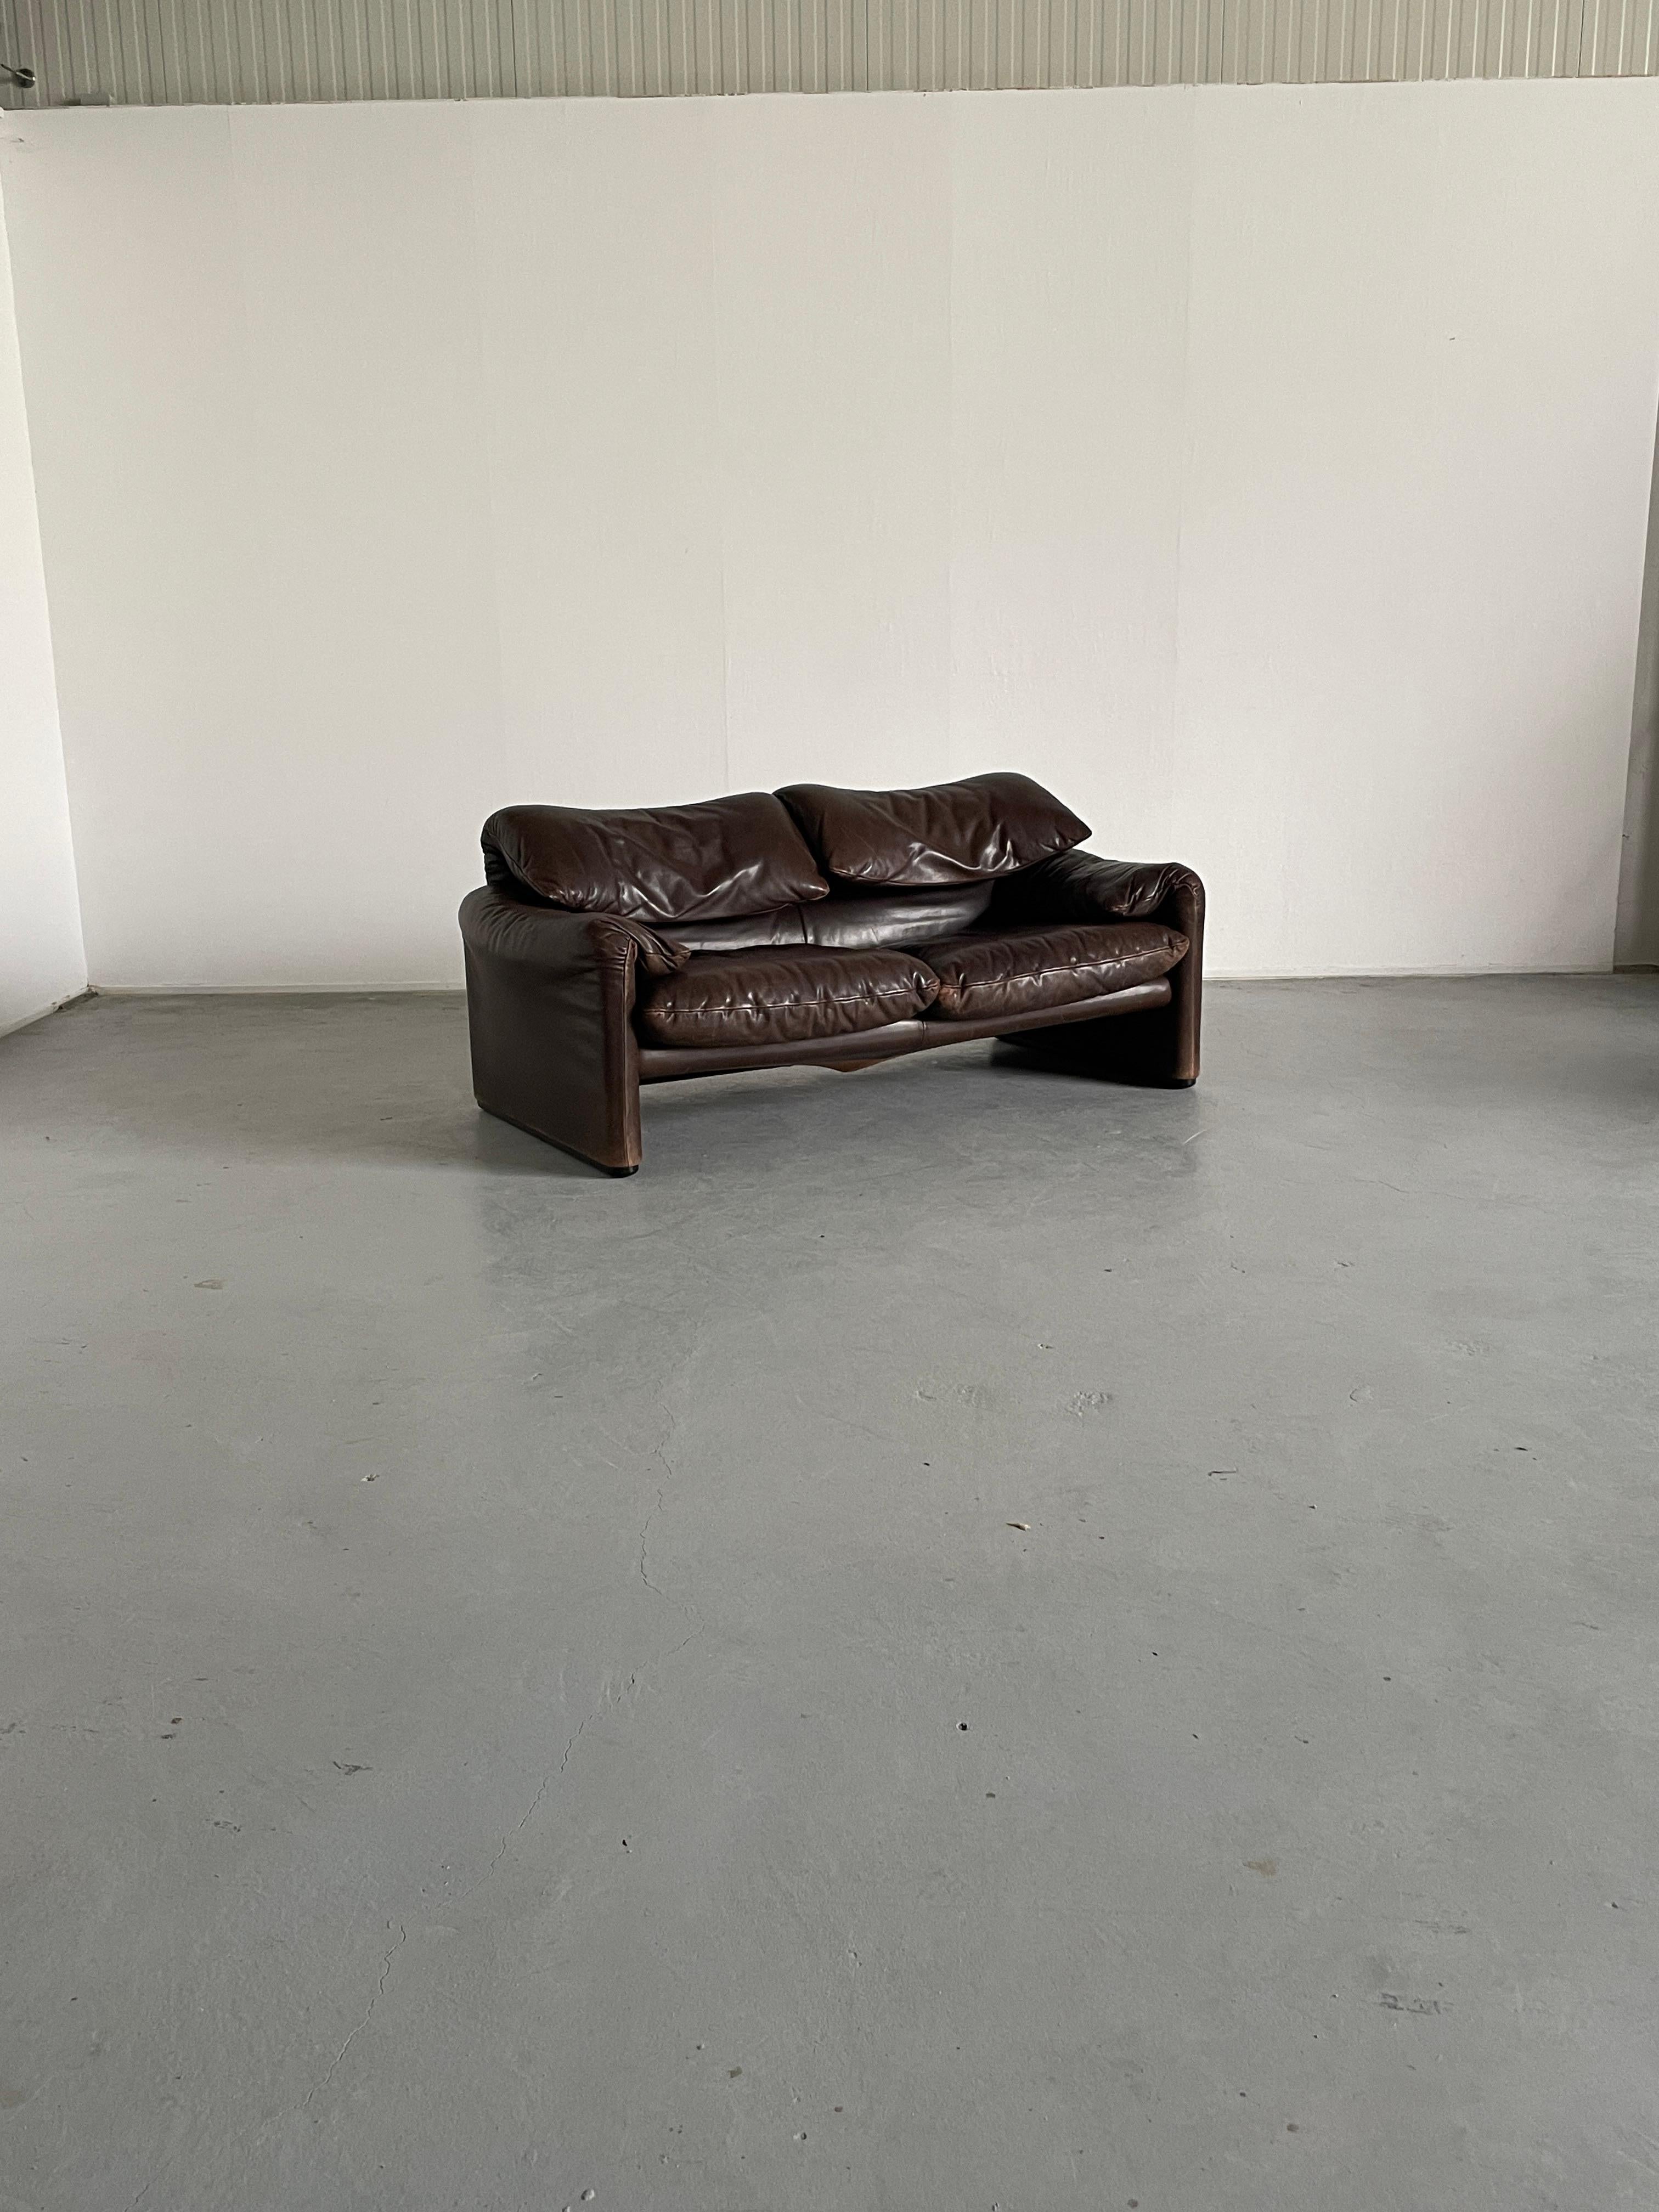 Very exciting and rare, 1970s original iconic 'Maralunga' two-seater sofa, designed by Vico Magistretti for Cassina.
Late 1970s original production in dark brown leather.

In very good used condition and very well preserved with expected signs of